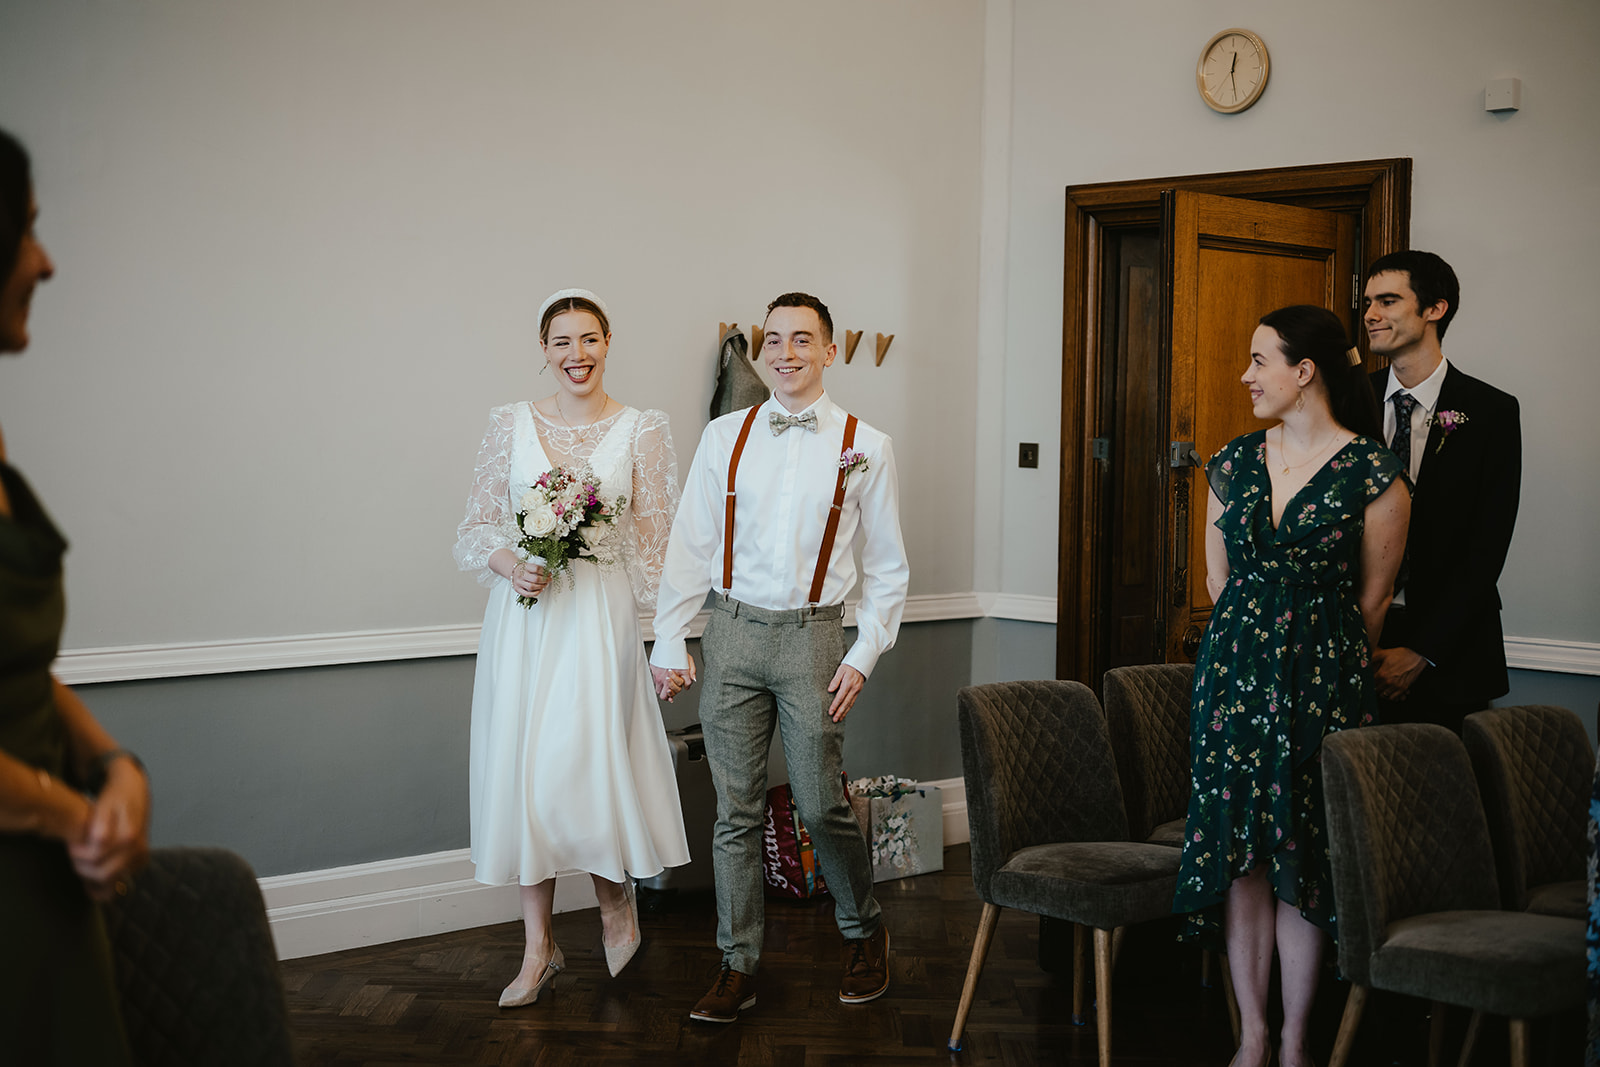 Alex and Christina's Wedding ceremony in the room 99 at Islington Town Hall